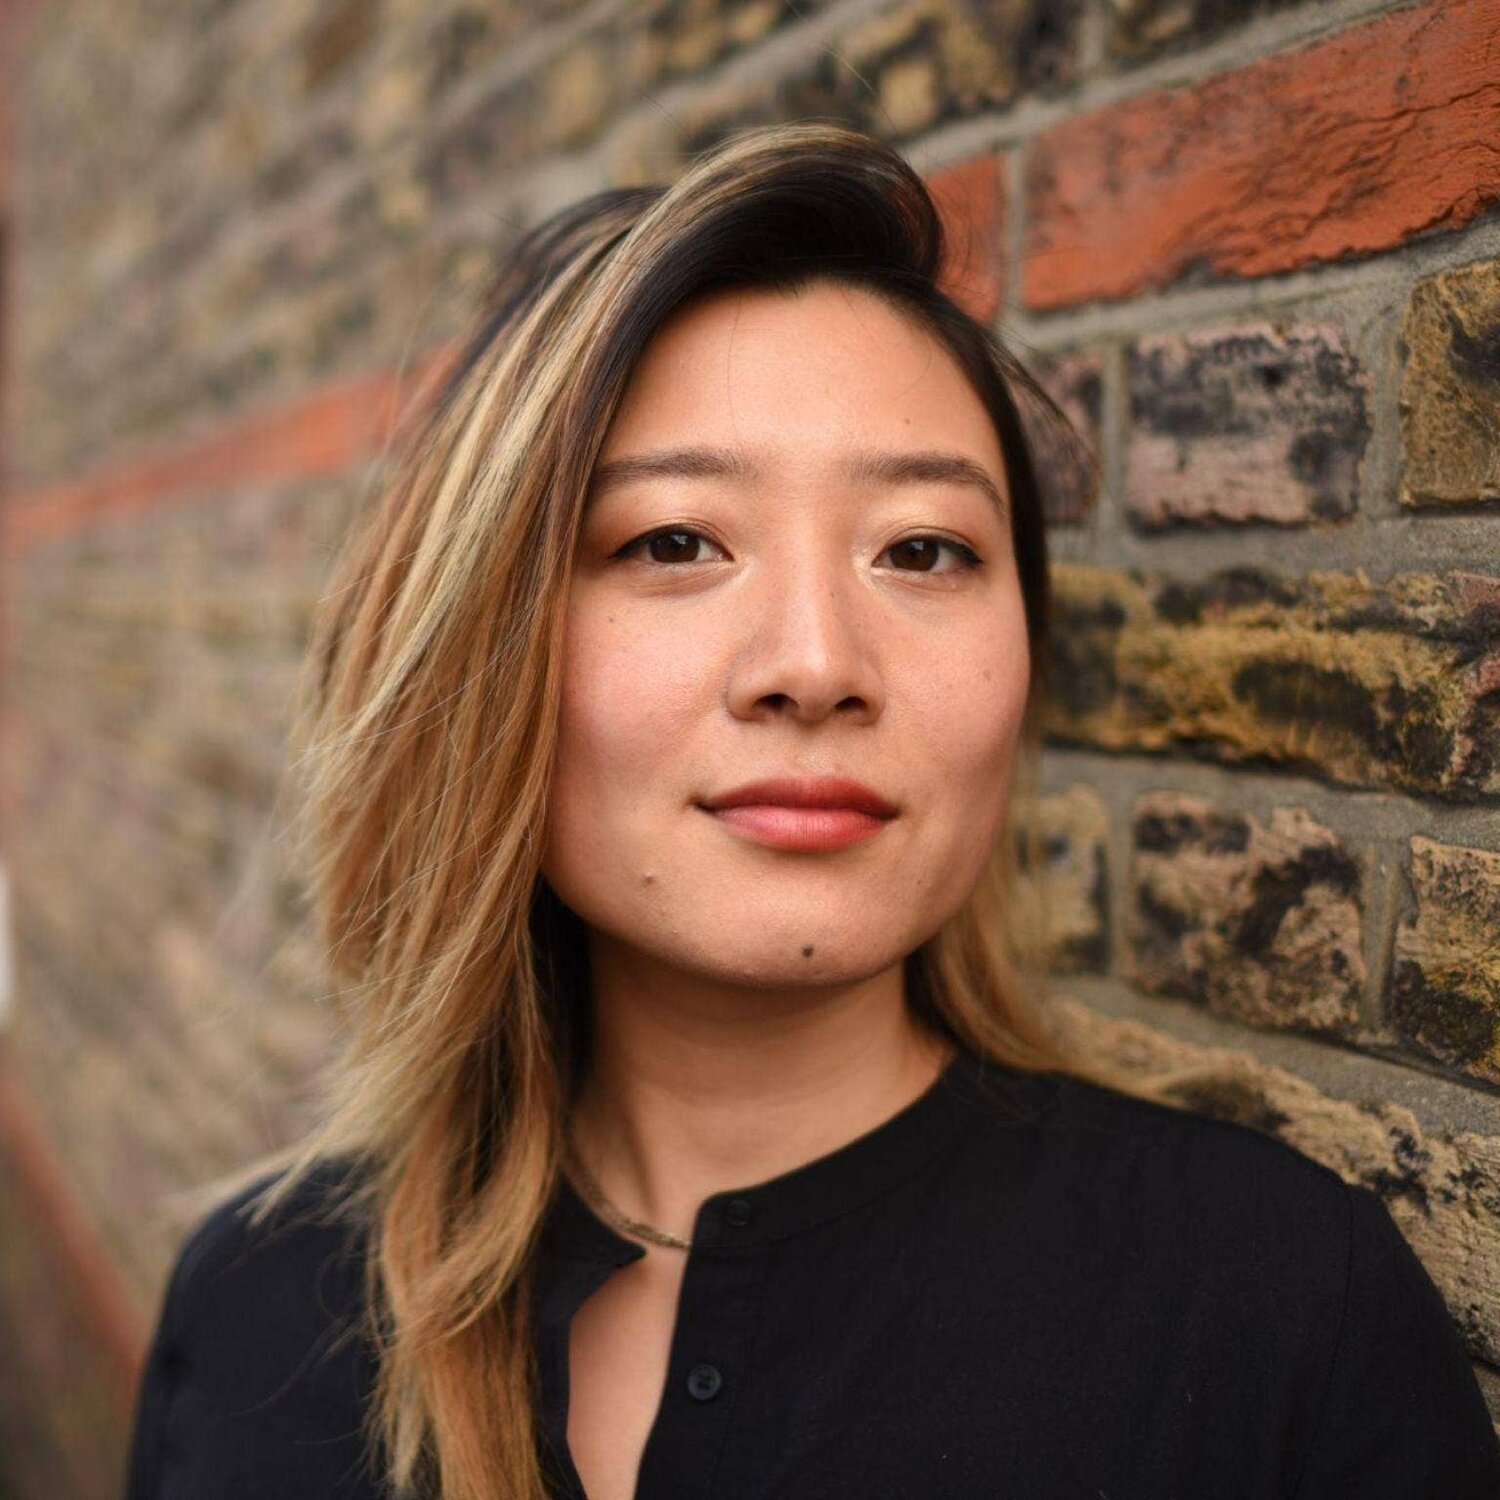 The New York Times: Isabella Kwai joins London Express